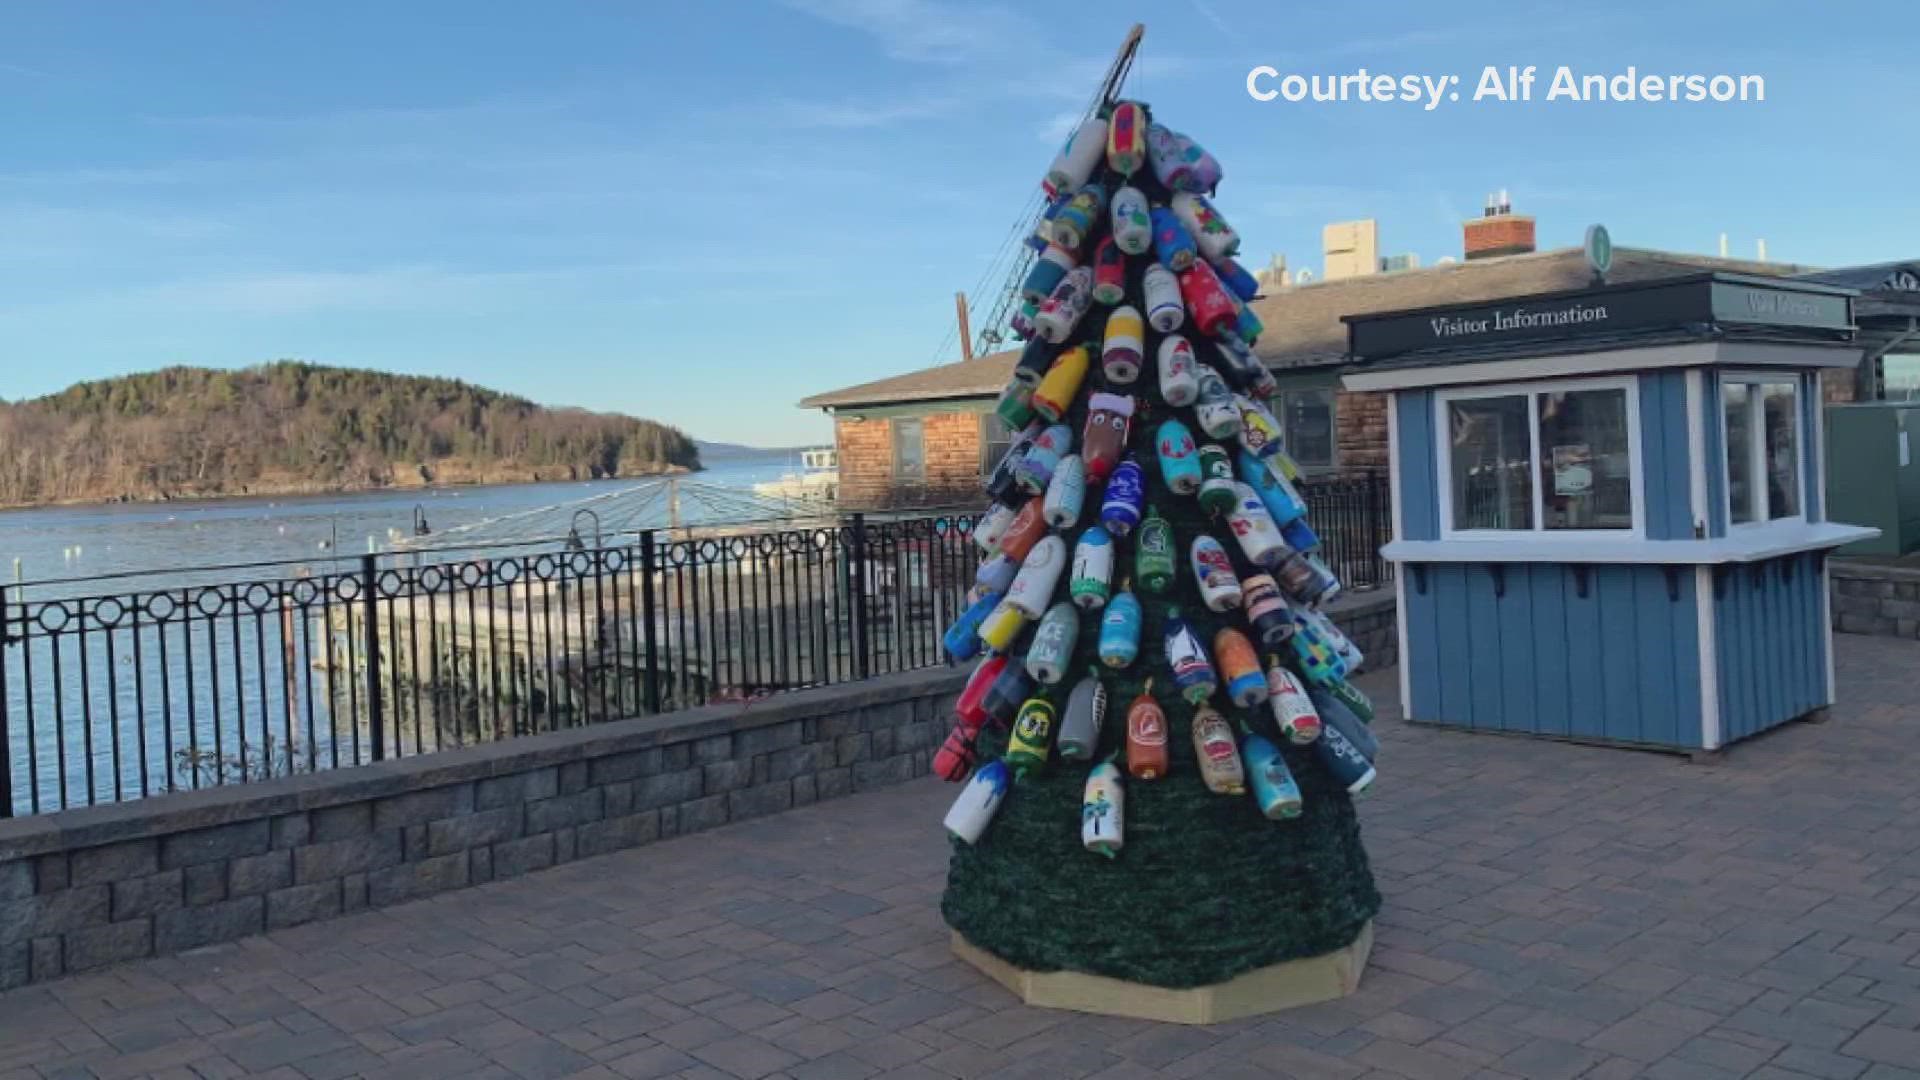 The blank buoys cost $20 each. Each person or business that purchased a buoy is being entered to win a $500 raffle prize, with the rest of the proceeds going to MLA.